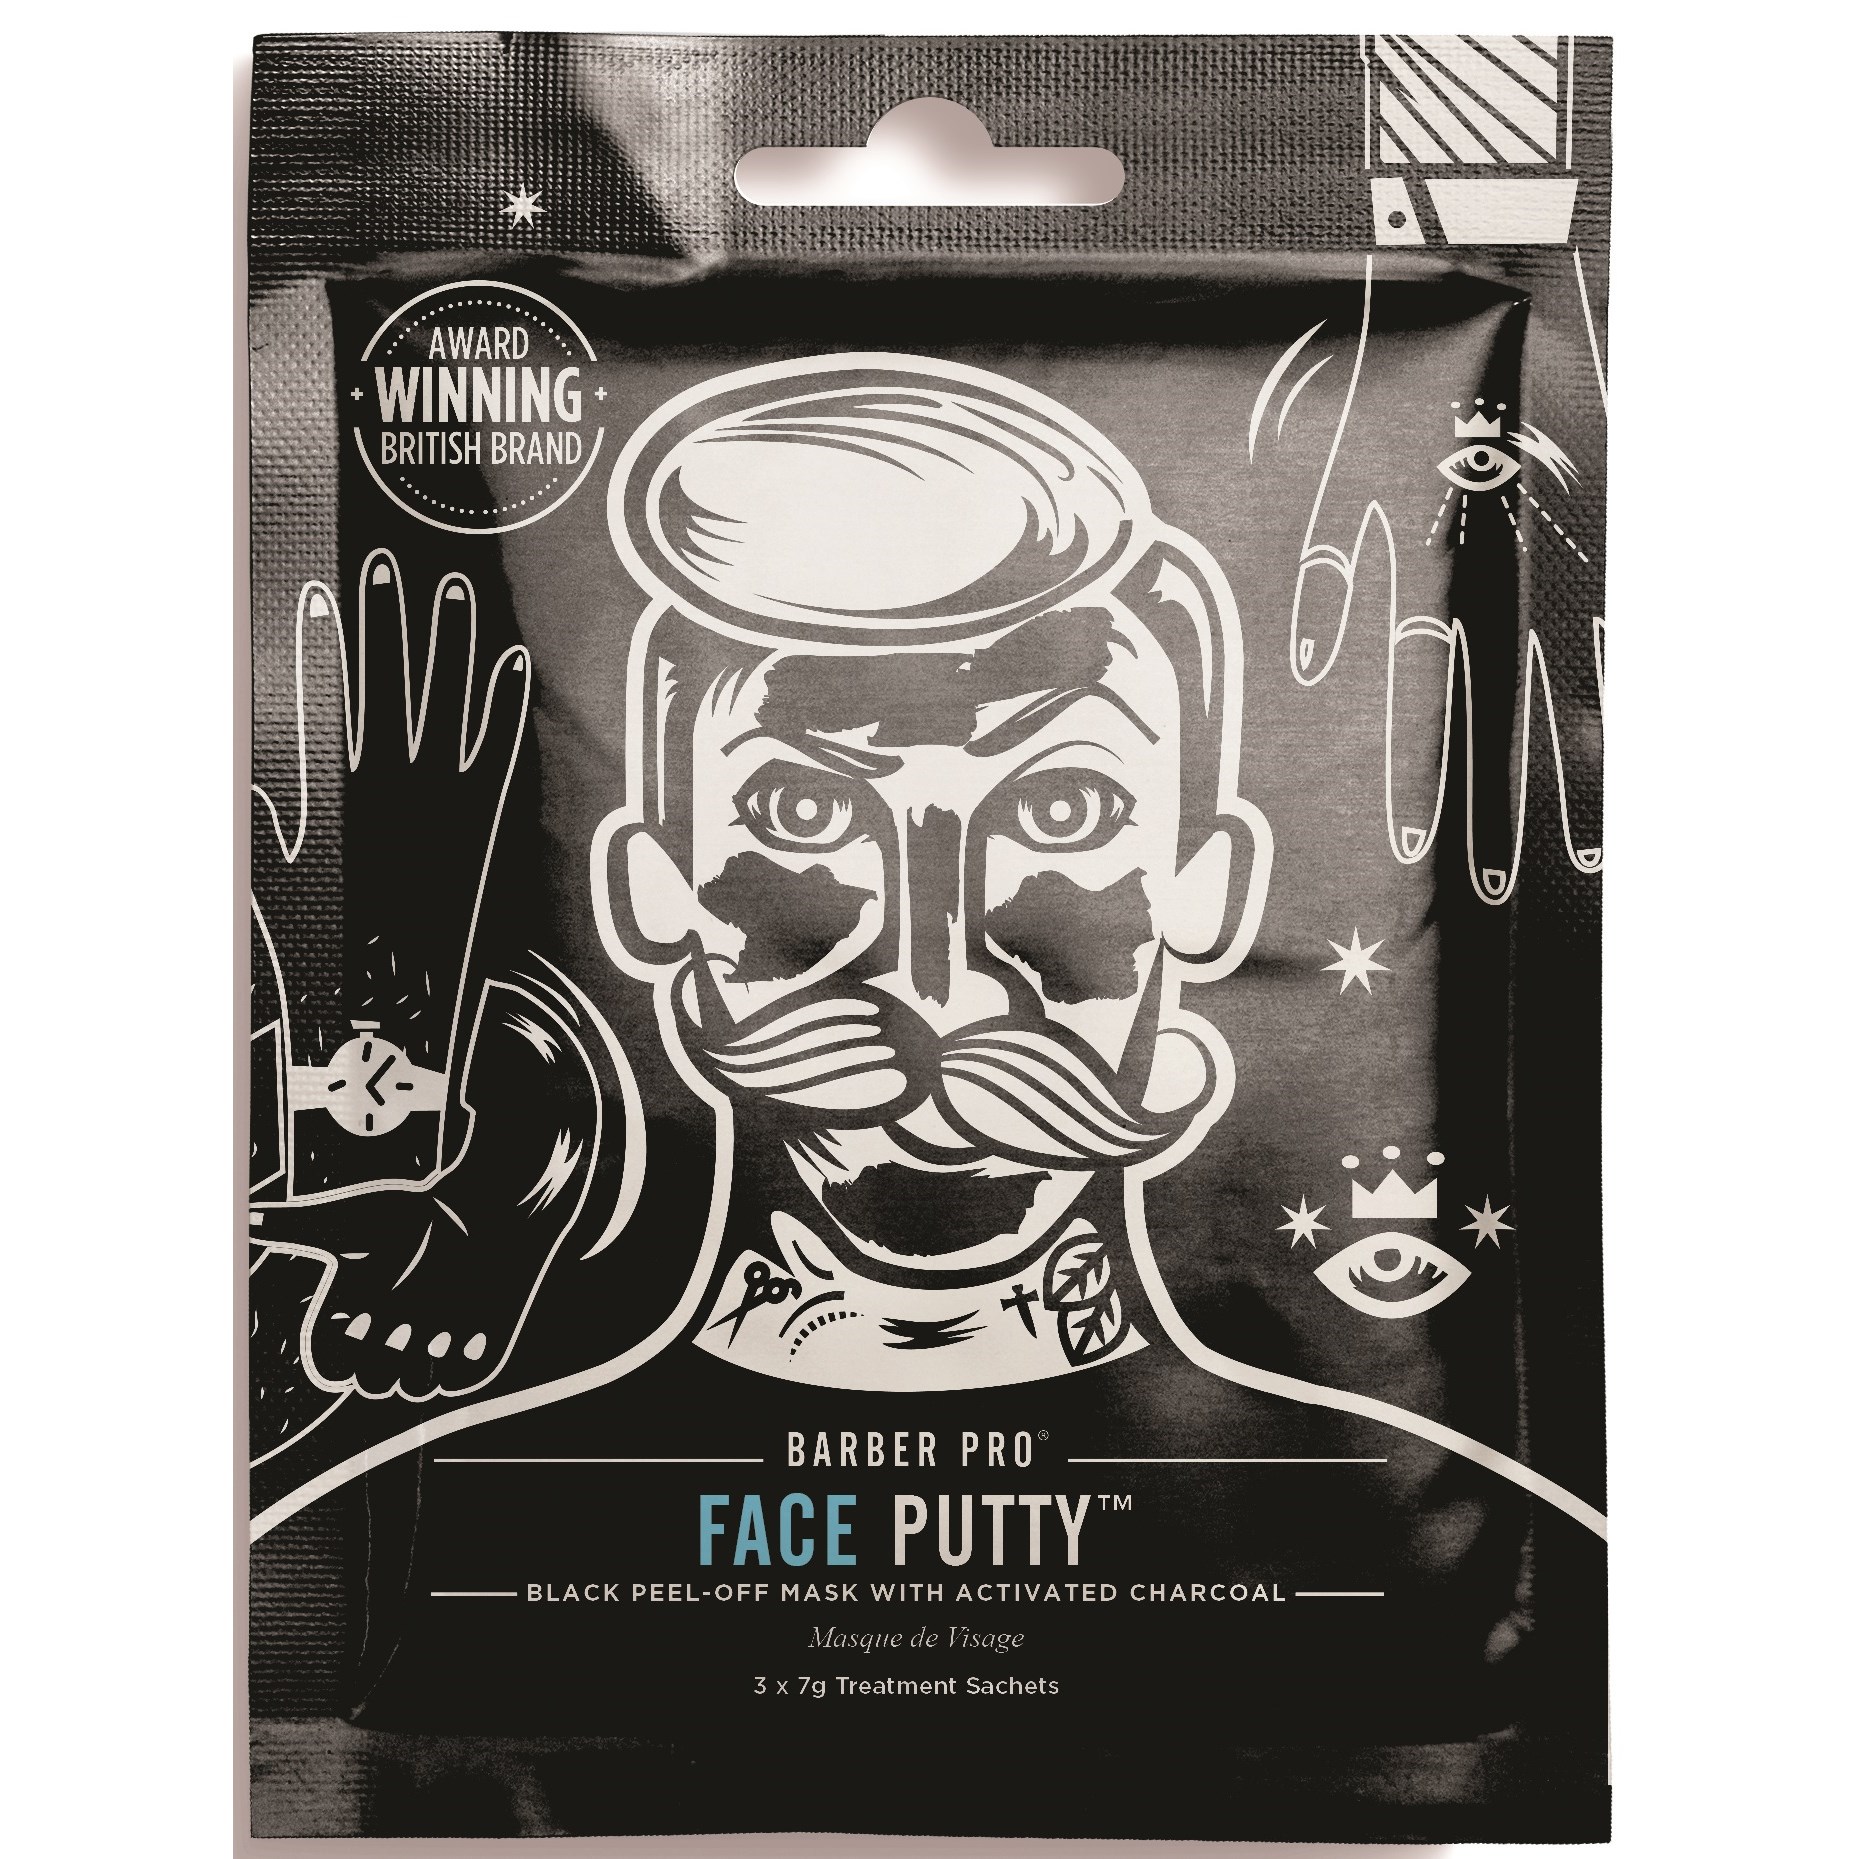 Läs mer om Barber pro Face Putty Black Peel-Off Mask With Activated Charcoal